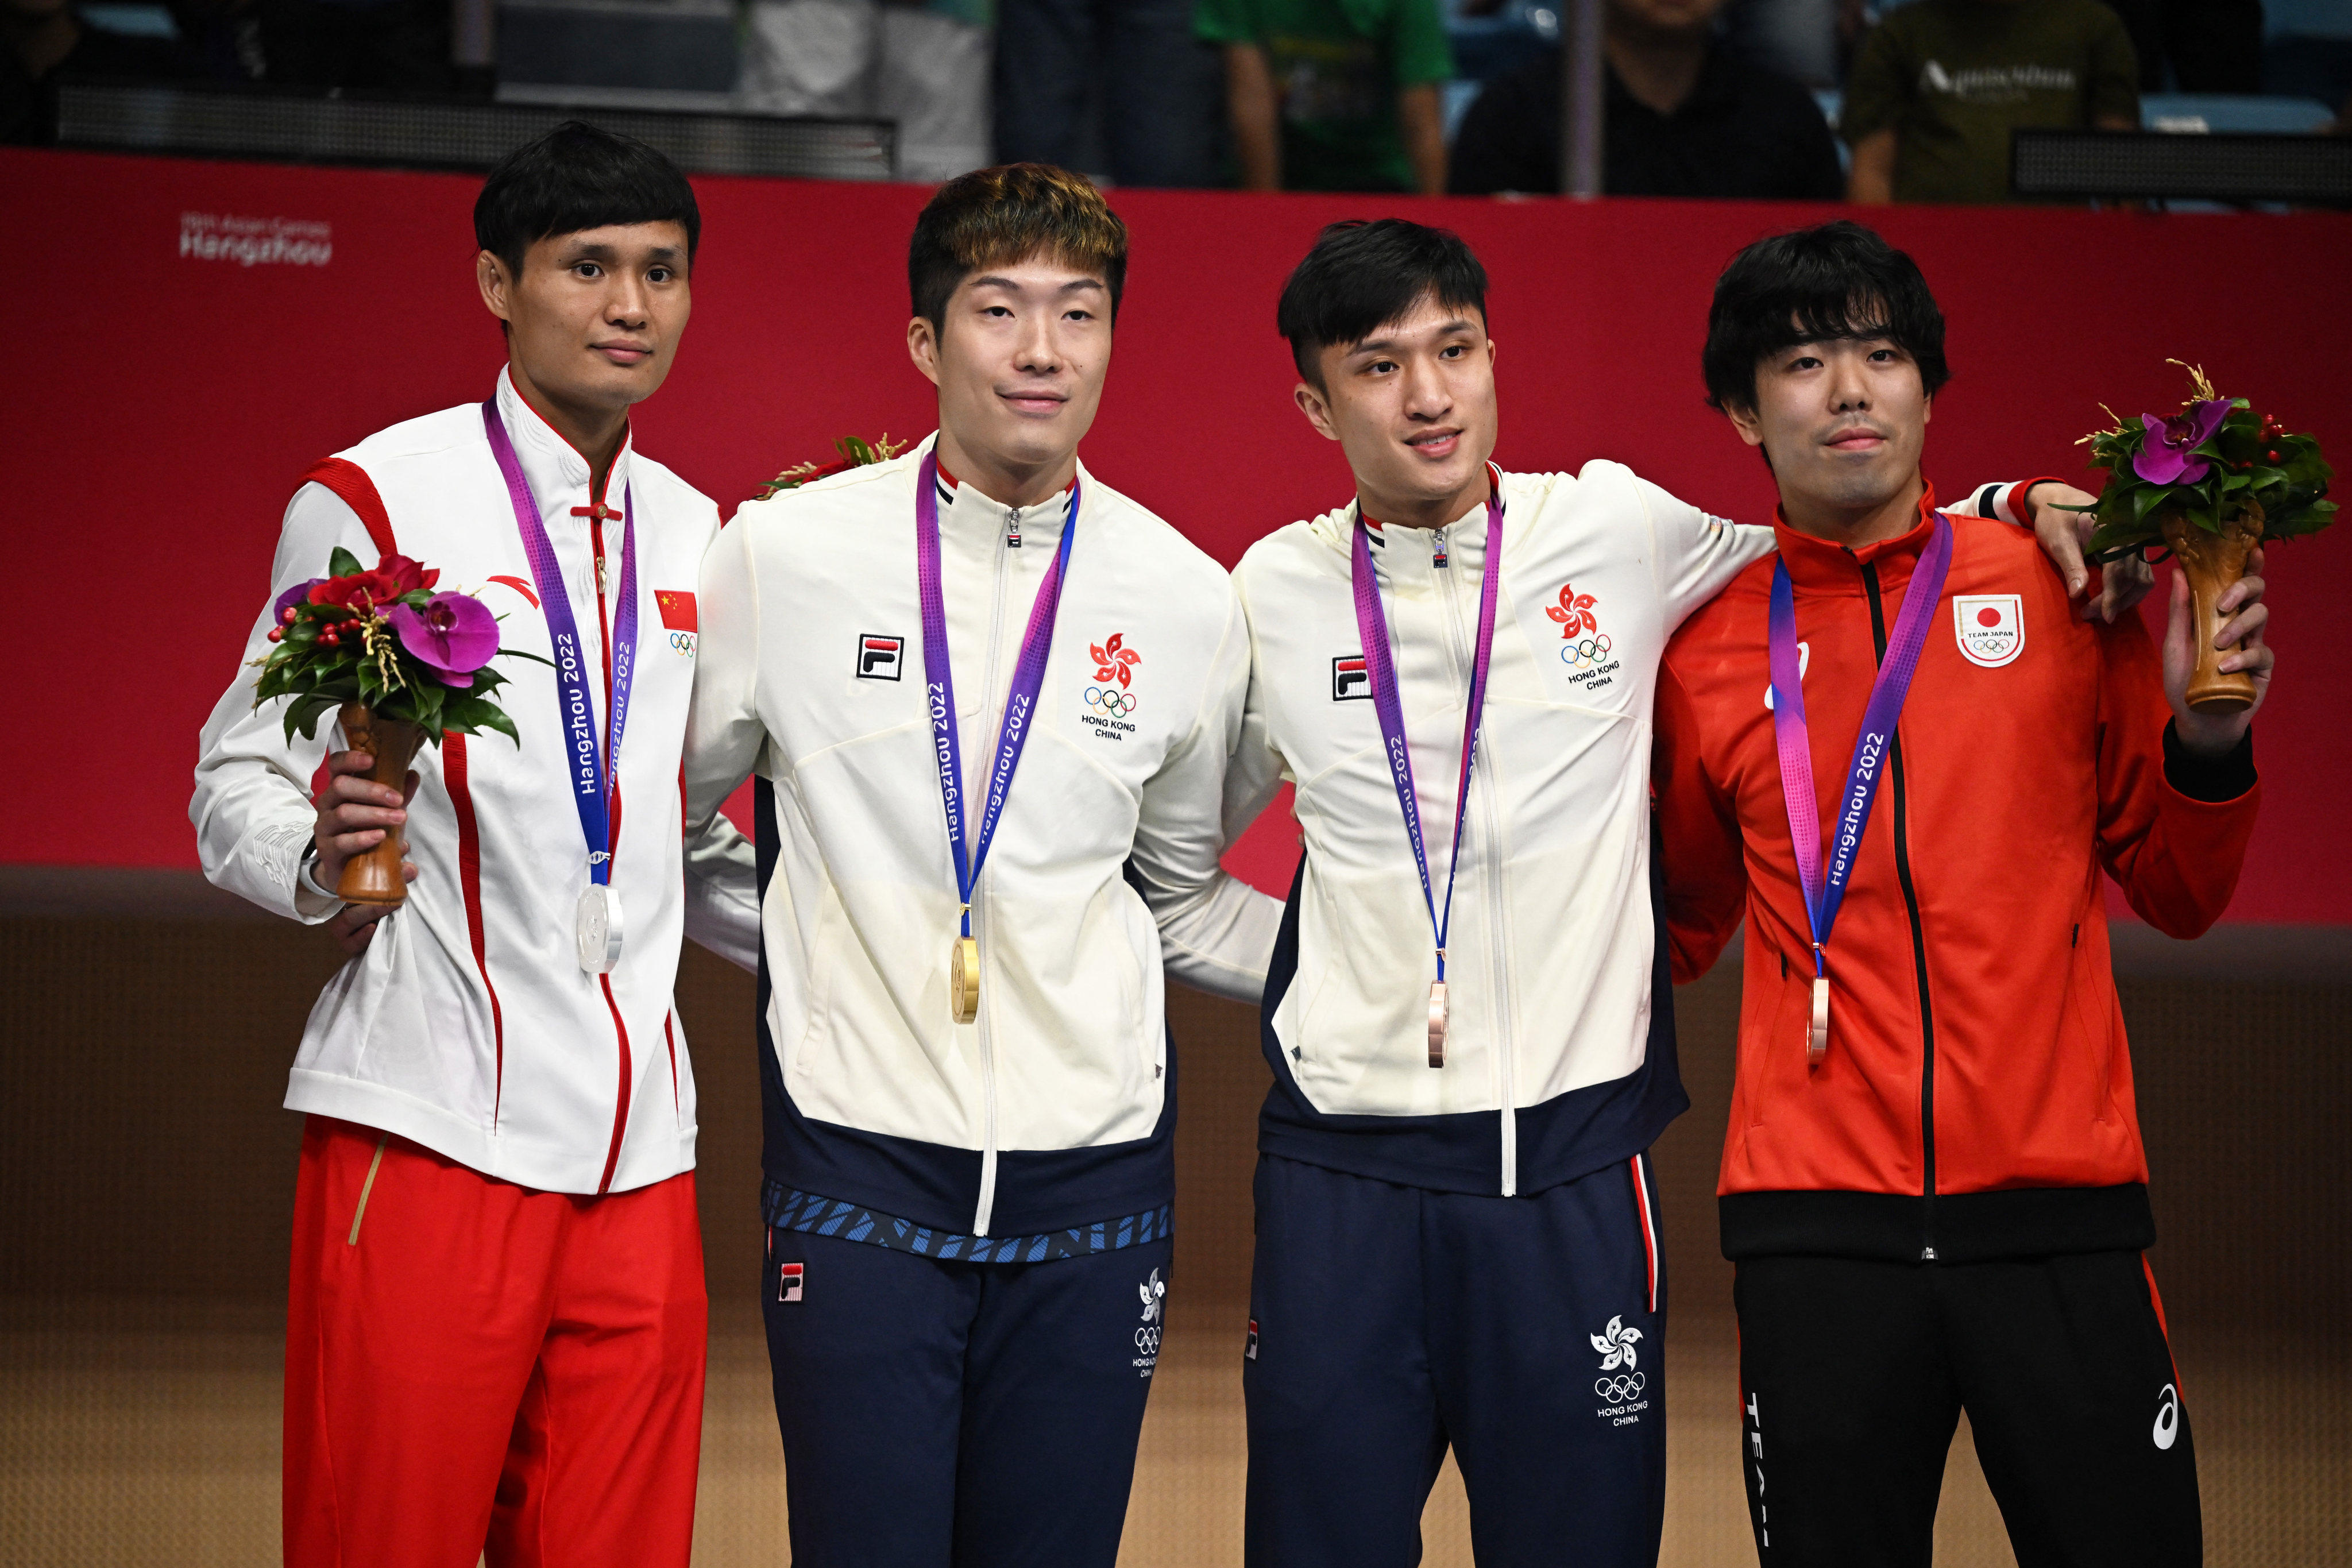 Hong Kong’s Cheung Ka-long celebrates on the podium alongside teammate Ryan Choi, and silver medallist Chen Haiwei (left) and the other bronze medallist, Takahiro. Photo: Reuters